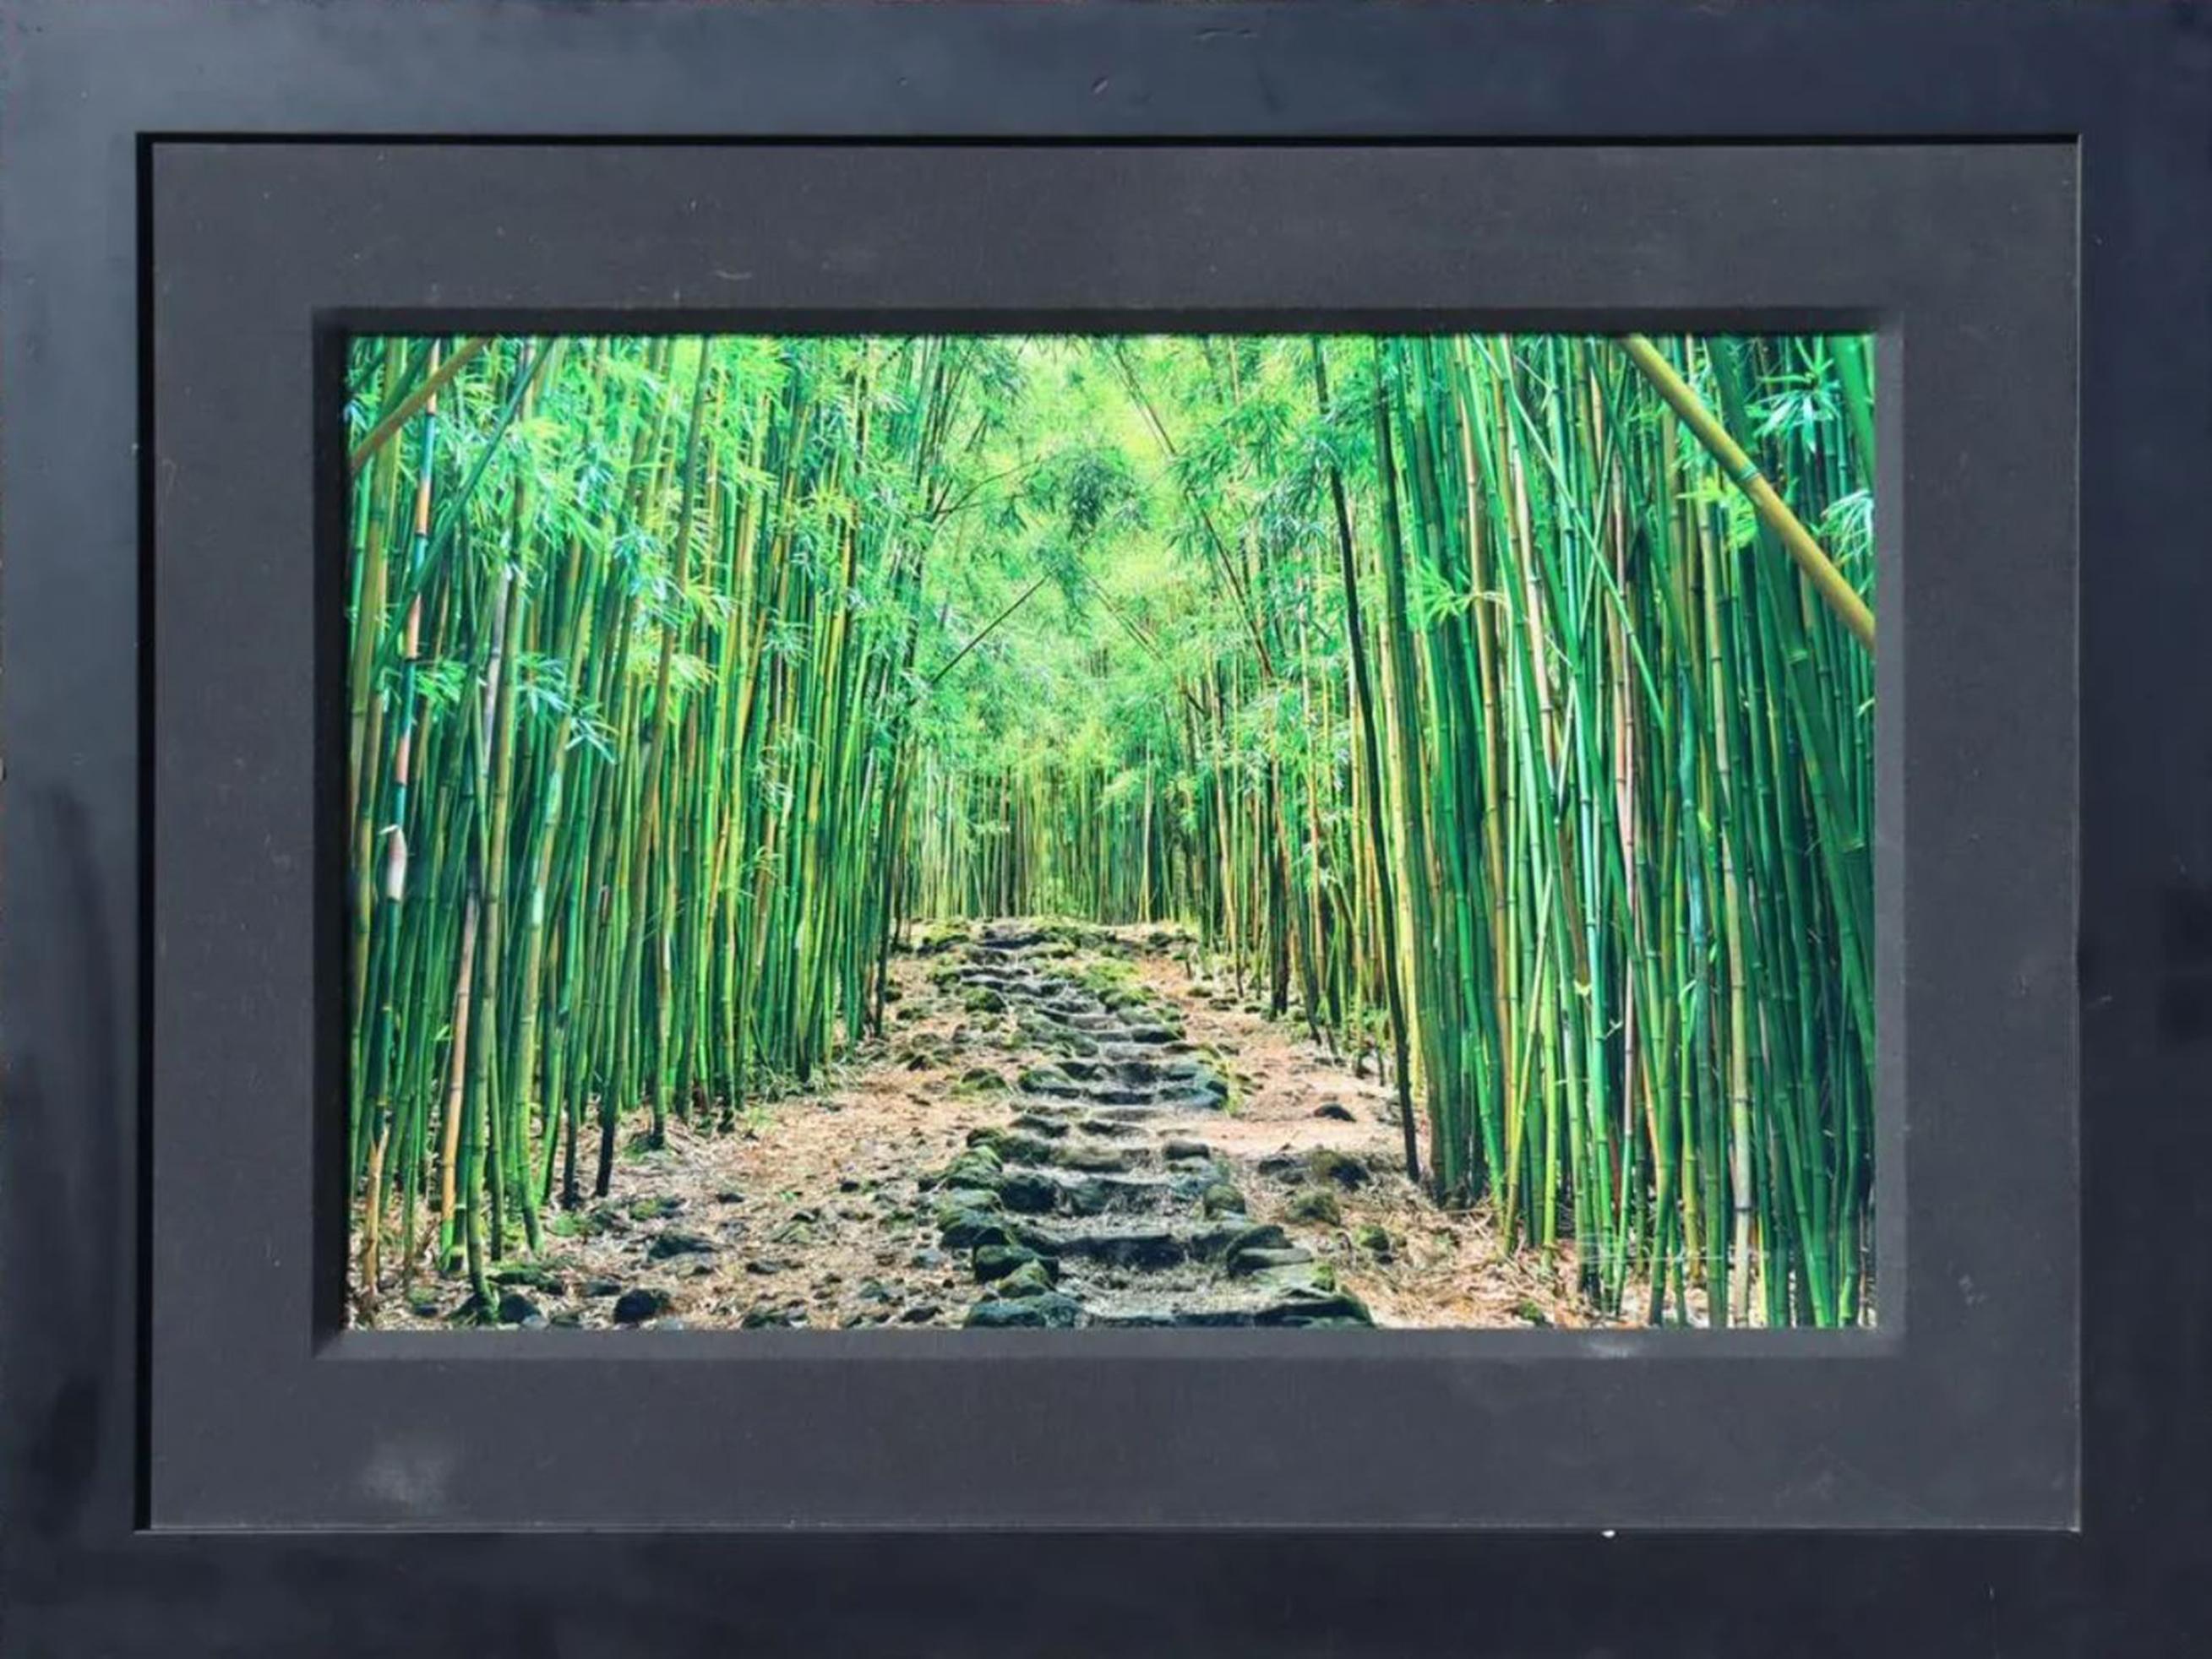 Lucky Bamboo Path Photo Taken by Peter Lik in Maui Hawaii, Green Bamboo, Framed For Sale